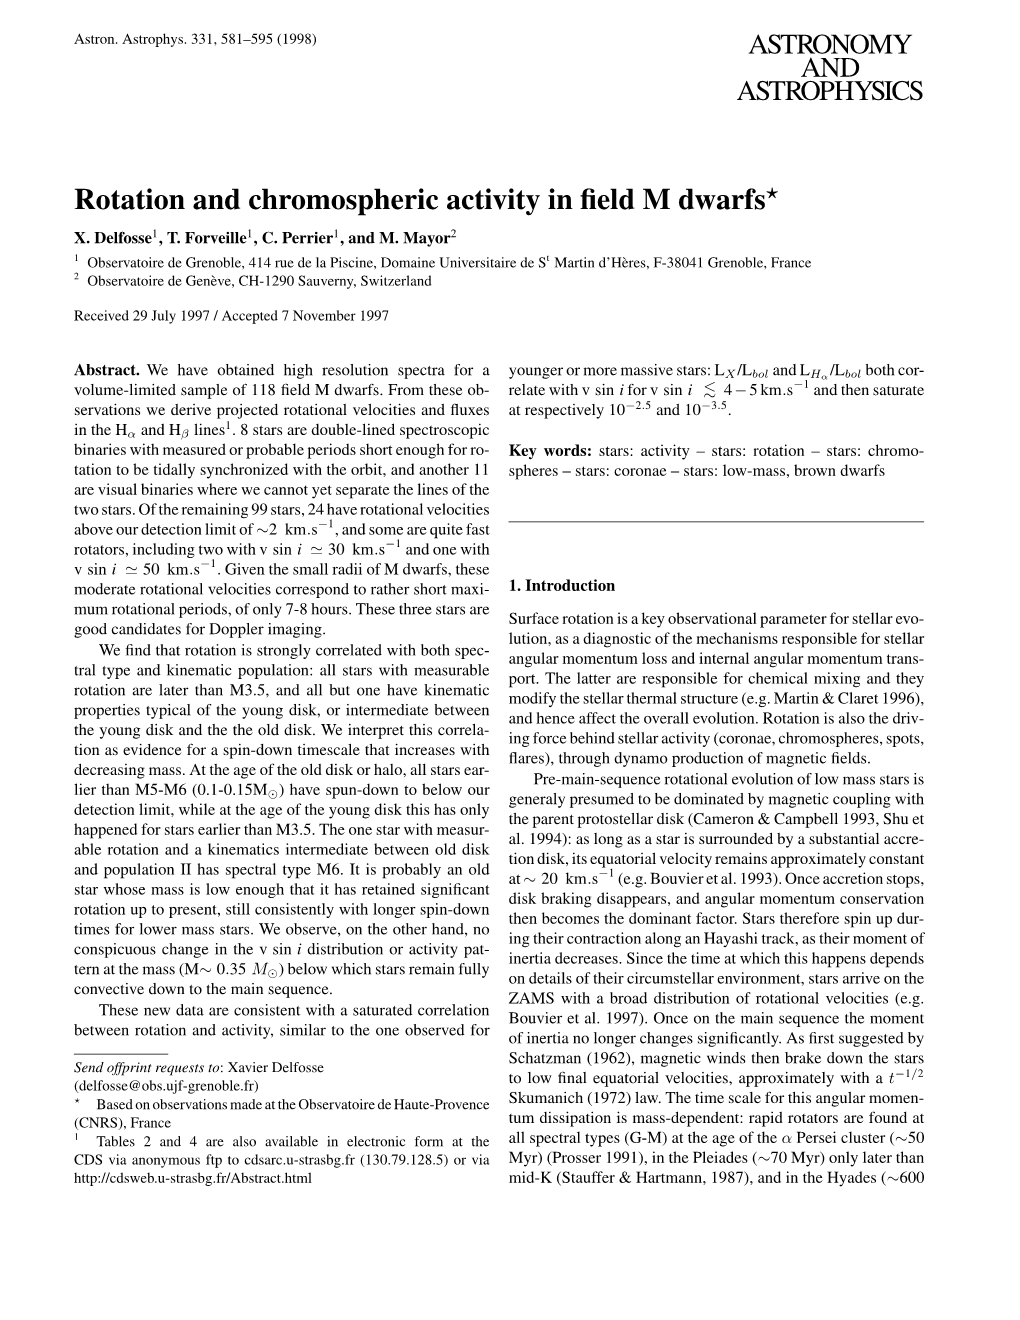 Rotation and Chromospheric Activity in Field M Dwarfs*